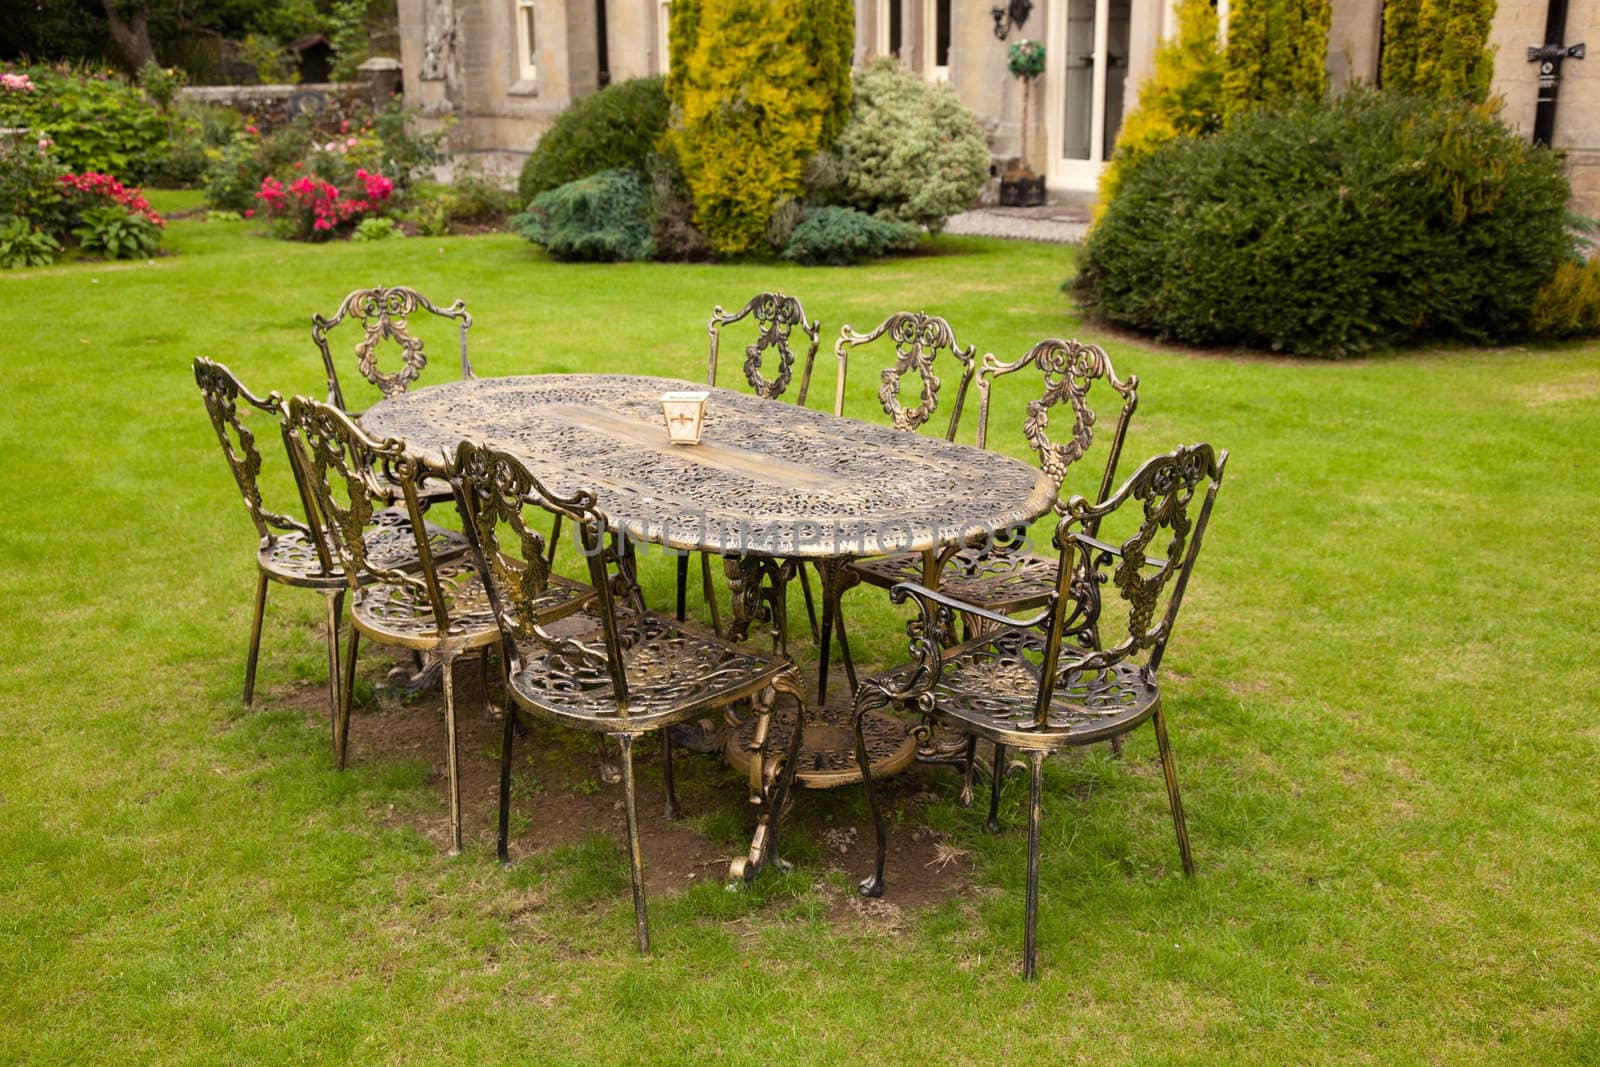 Old fashioned gold colored cast iron table and eight chairs on formal lawn